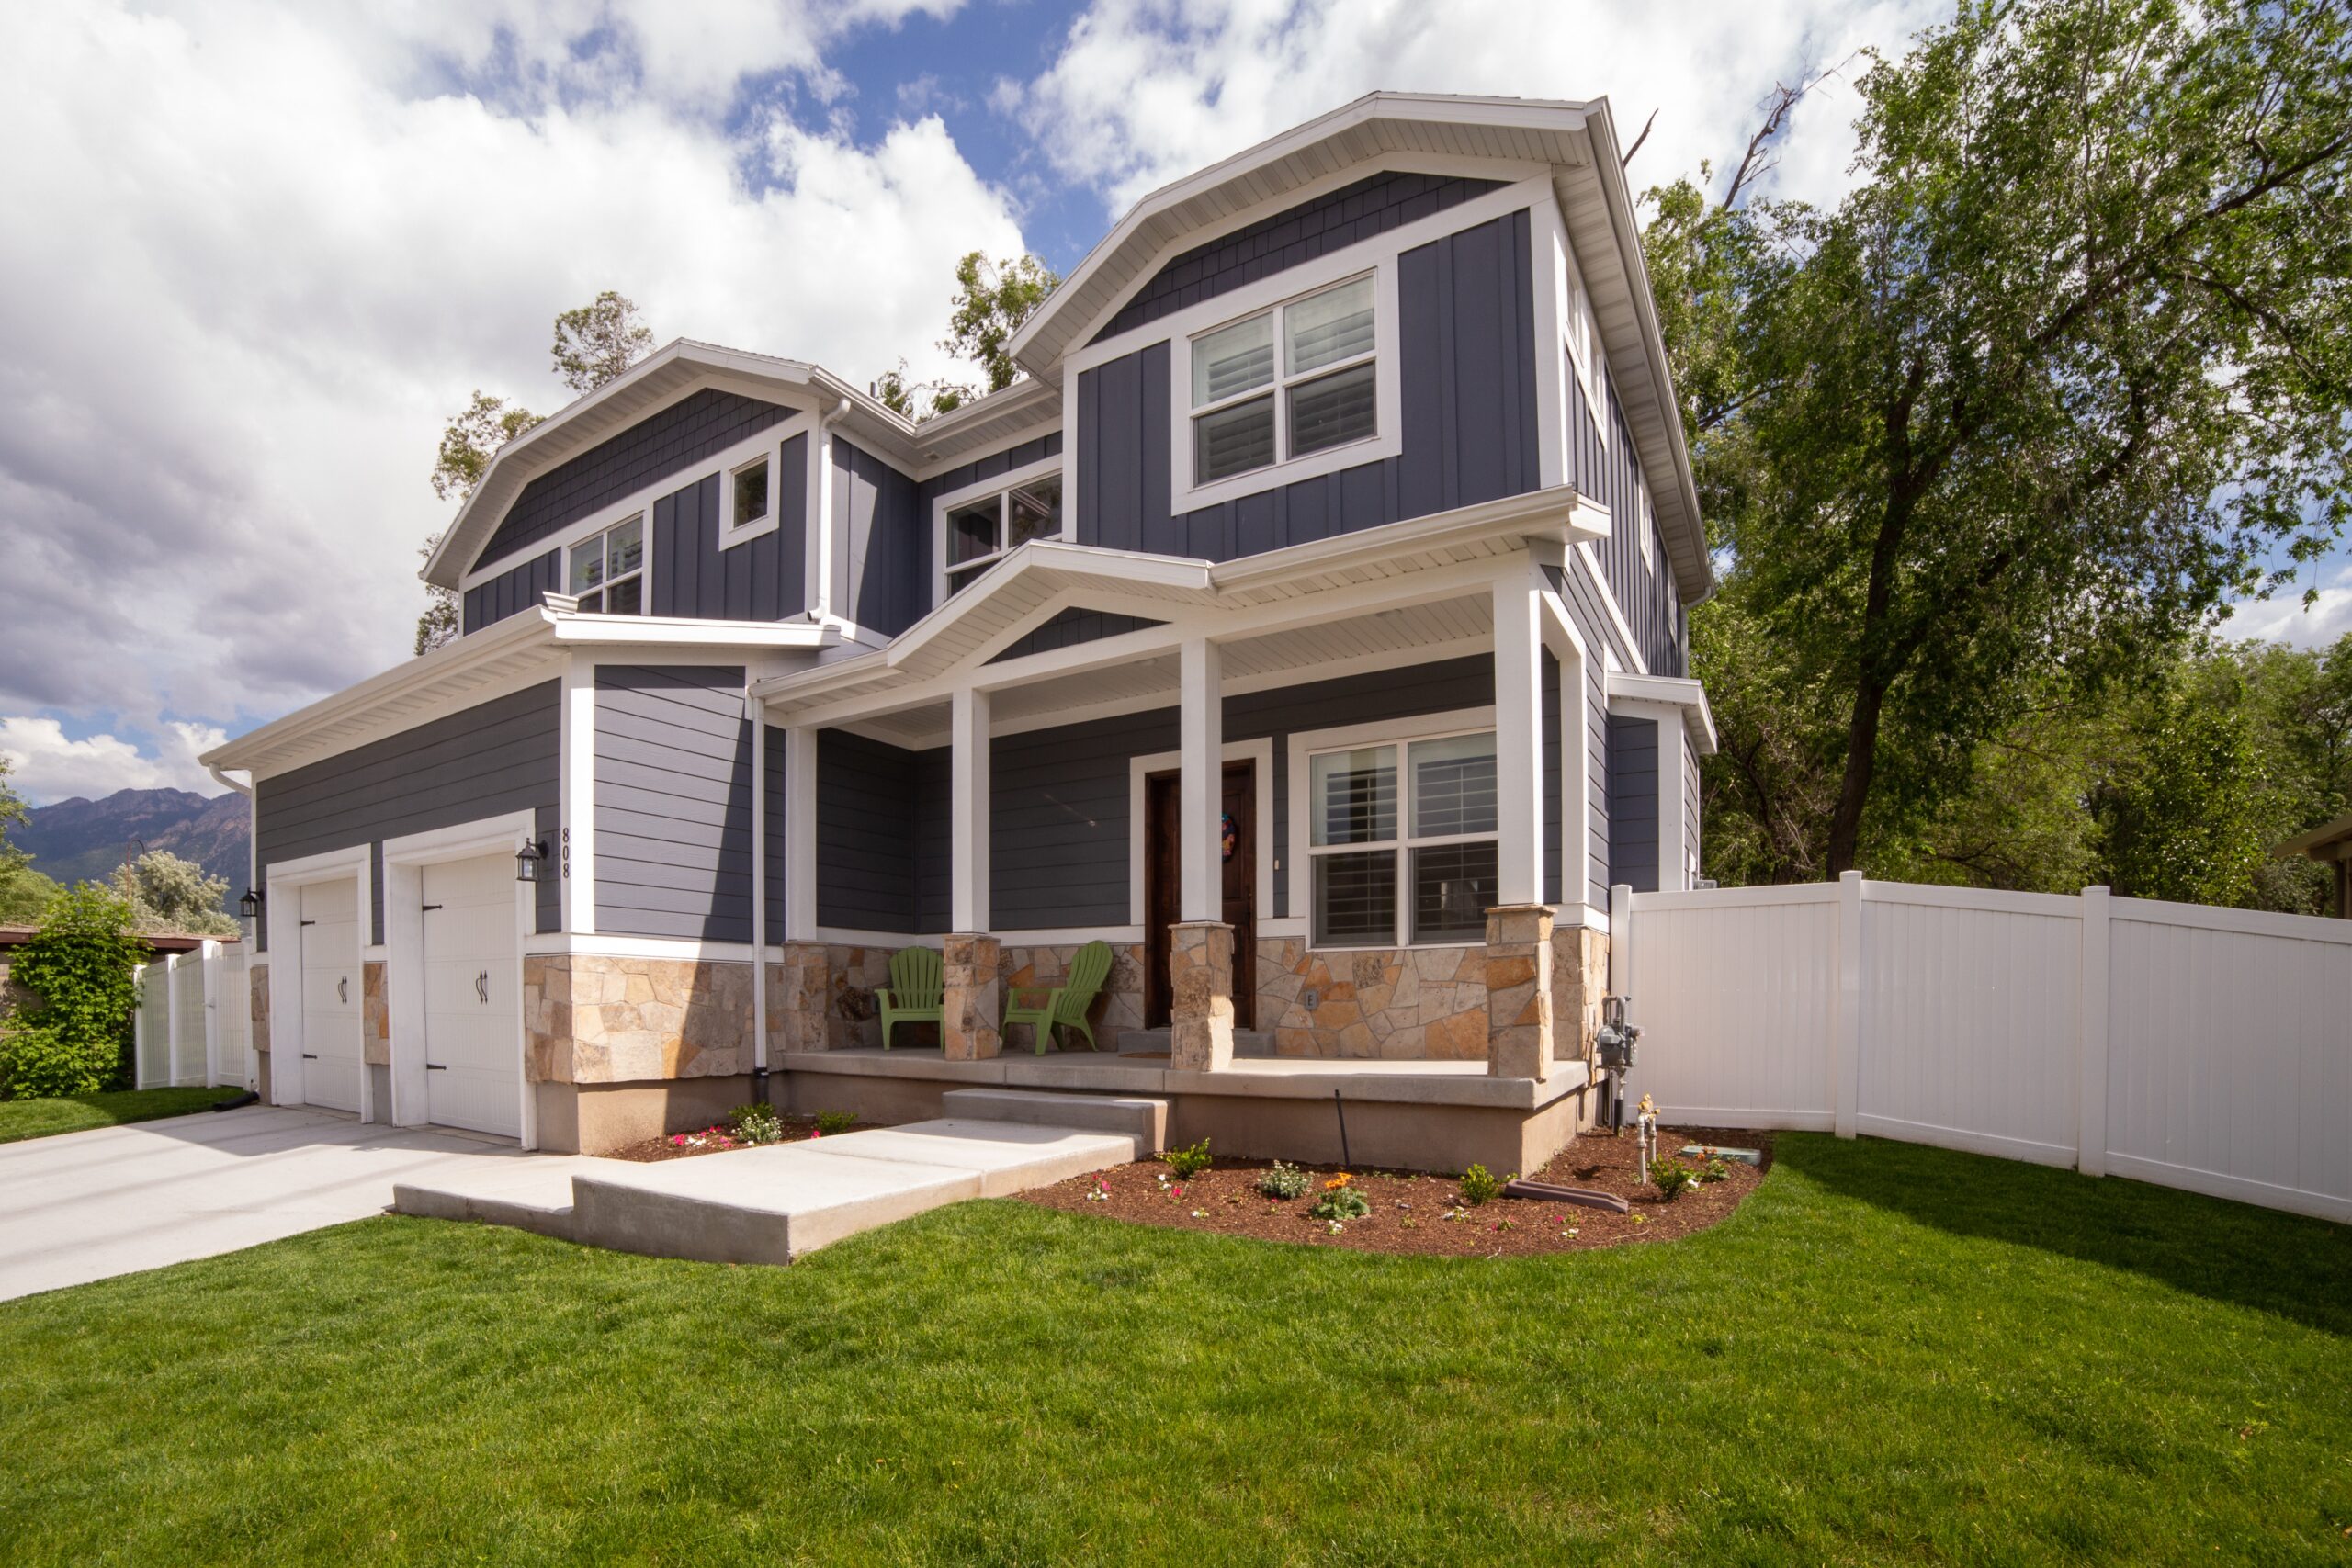 Expert Roofing & Siding Services in Meridian, ID Enhancing Your Home's Protection and Aesthetics